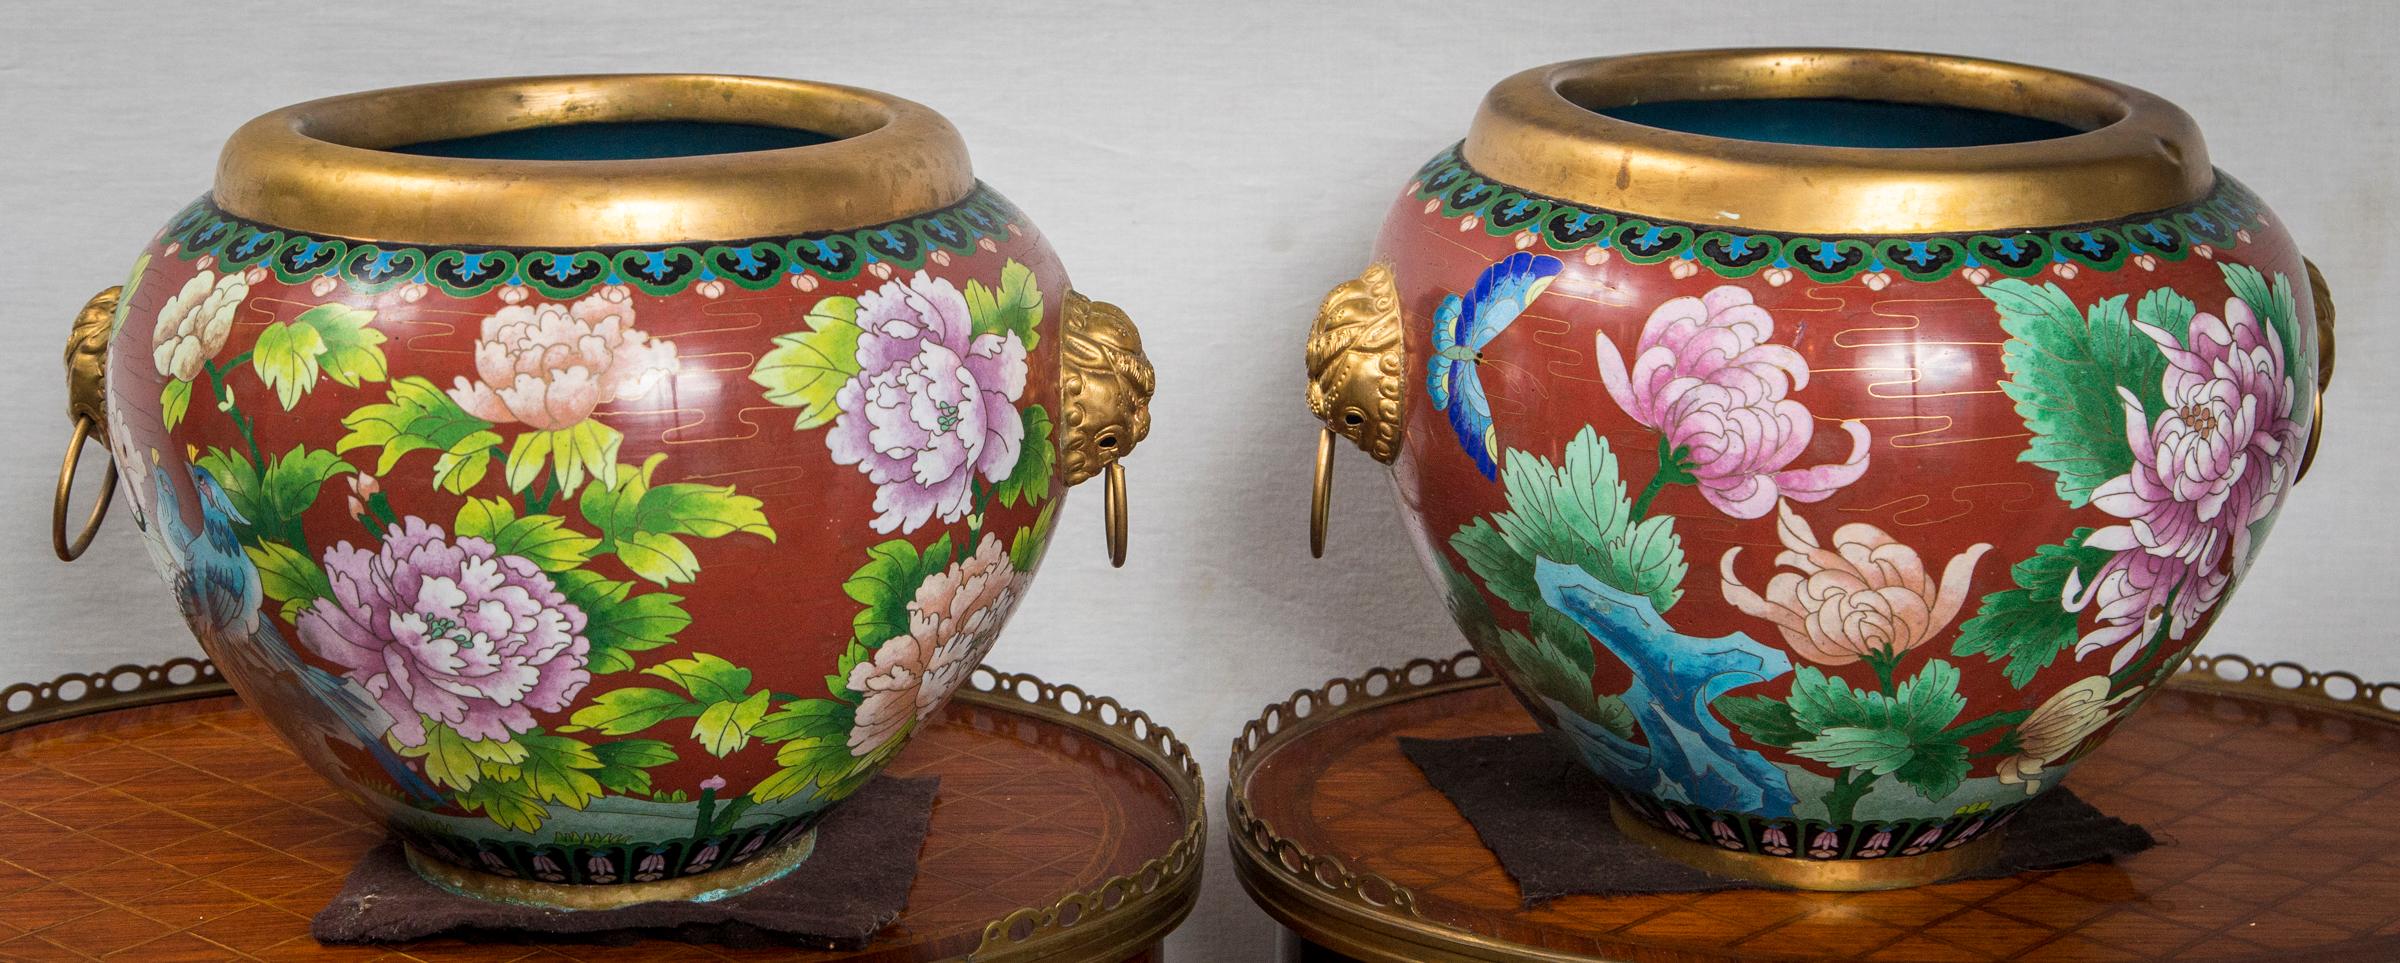 19th Century Pair of Chinese Cloisonné Round